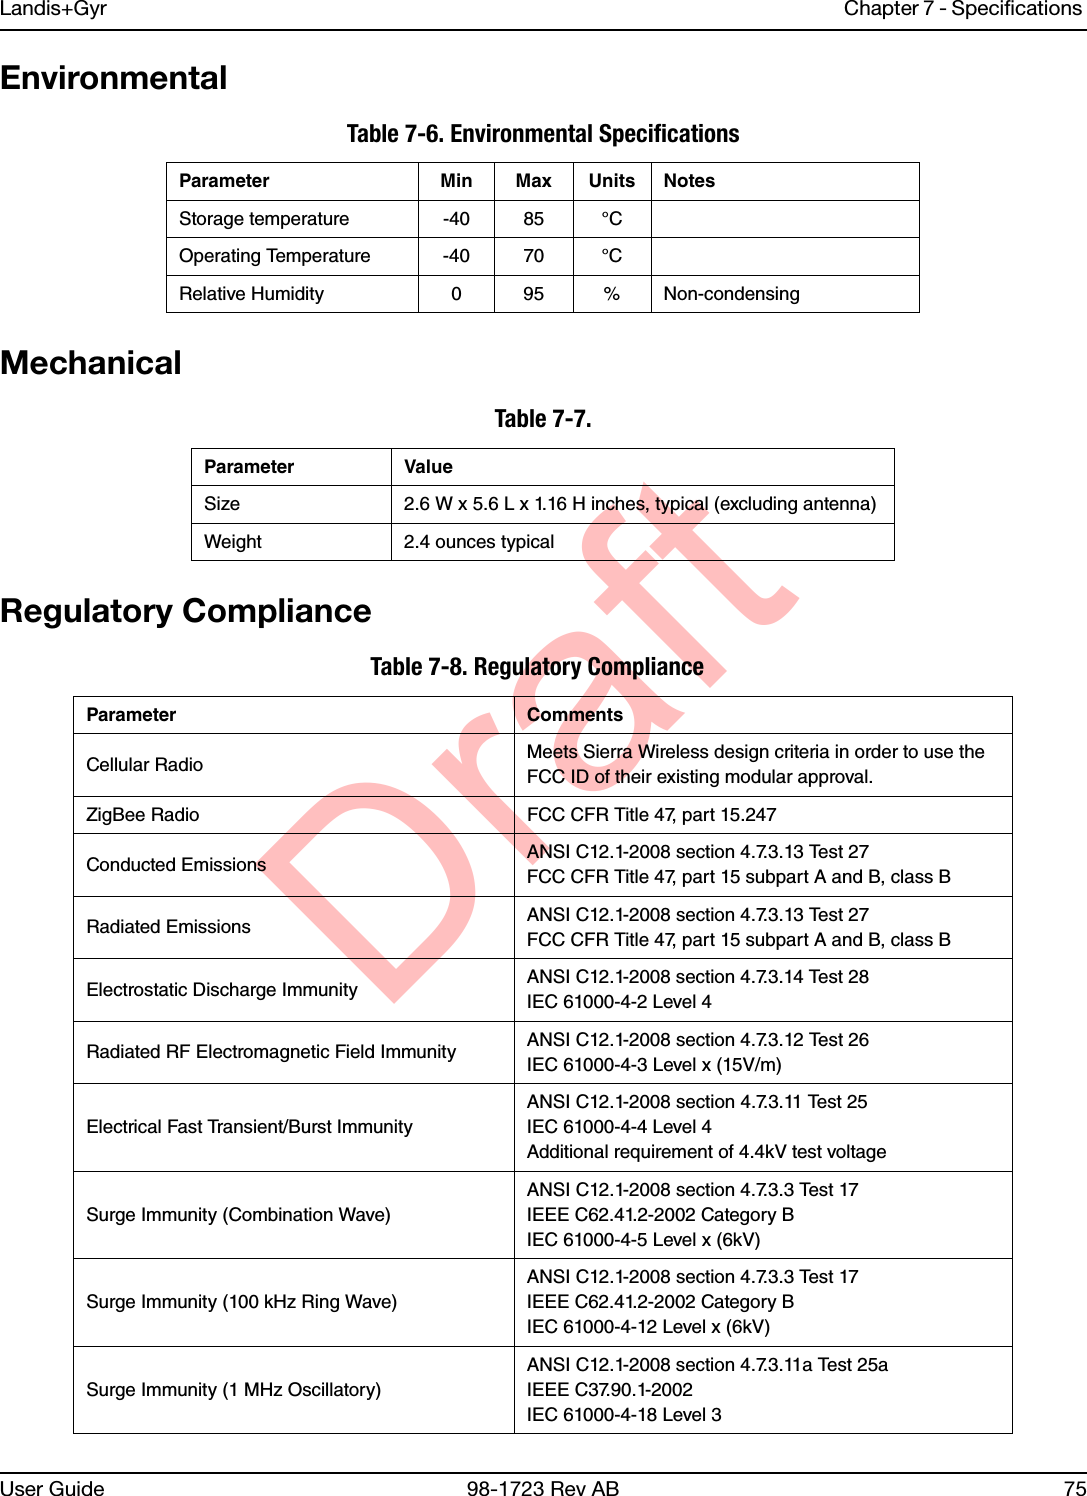 DraftLandis+Gyr Chapter 7 - Specifications User Guide 98-1723 Rev AB 75EnvironmentalMechanicalRegulatory ComplianceTable 7-6. Environmental SpecificationsParameter Min Max Units NotesStorage temperature -40 85 °COperating Temperature -40 70 °CRelative Humidity 0 95 % Non-condensingTable 7-7. Parameter ValueSize 2.6 W x 5.6 L x 1.16 H inches, typical (excluding antenna)Weight 2.4 ounces typicalTable 7-8. Regulatory Compliance Parameter CommentsCellular Radio Meets Sierra Wireless design criteria in order to use the FCC ID of their existing modular approval.ZigBee Radio FCC CFR Title 47, part 15.247Conducted Emissions ANSI C12.1-2008 section 4.7.3.13 Test 27FCC CFR Title 47, part 15 subpart A and B, class BRadiated Emissions ANSI C12.1-2008 section 4.7.3.13 Test 27FCC CFR Title 47, part 15 subpart A and B, class BElectrostatic Discharge Immunity ANSI C12.1-2008 section 4.7.3.14 Test 28IEC 61000-4-2 Level 4Radiated RF Electromagnetic Field Immunity ANSI C12.1-2008 section 4.7.3.12 Test 26IEC 61000-4-3 Level x (15V/m)Electrical Fast Transient/Burst ImmunityANSI C12.1-2008 section 4.7.3.11 Test 25IEC 61000-4-4 Level 4Additional requirement of 4.4kV test voltageSurge Immunity (Combination Wave)ANSI C12.1-2008 section 4.7.3.3 Test 17IEEE C62.41.2-2002 Category BIEC 61000-4-5 Level x (6kV)Surge Immunity (100 kHz Ring Wave)ANSI C12.1-2008 section 4.7.3.3 Test 17IEEE C62.41.2-2002 Category BIEC 61000-4-12 Level x (6kV)Surge Immunity (1 MHz Oscillatory)ANSI C12.1-2008 section 4.7.3.11a Test 25aIEEE C37.90.1-2002IEC 61000-4-18 Level 3